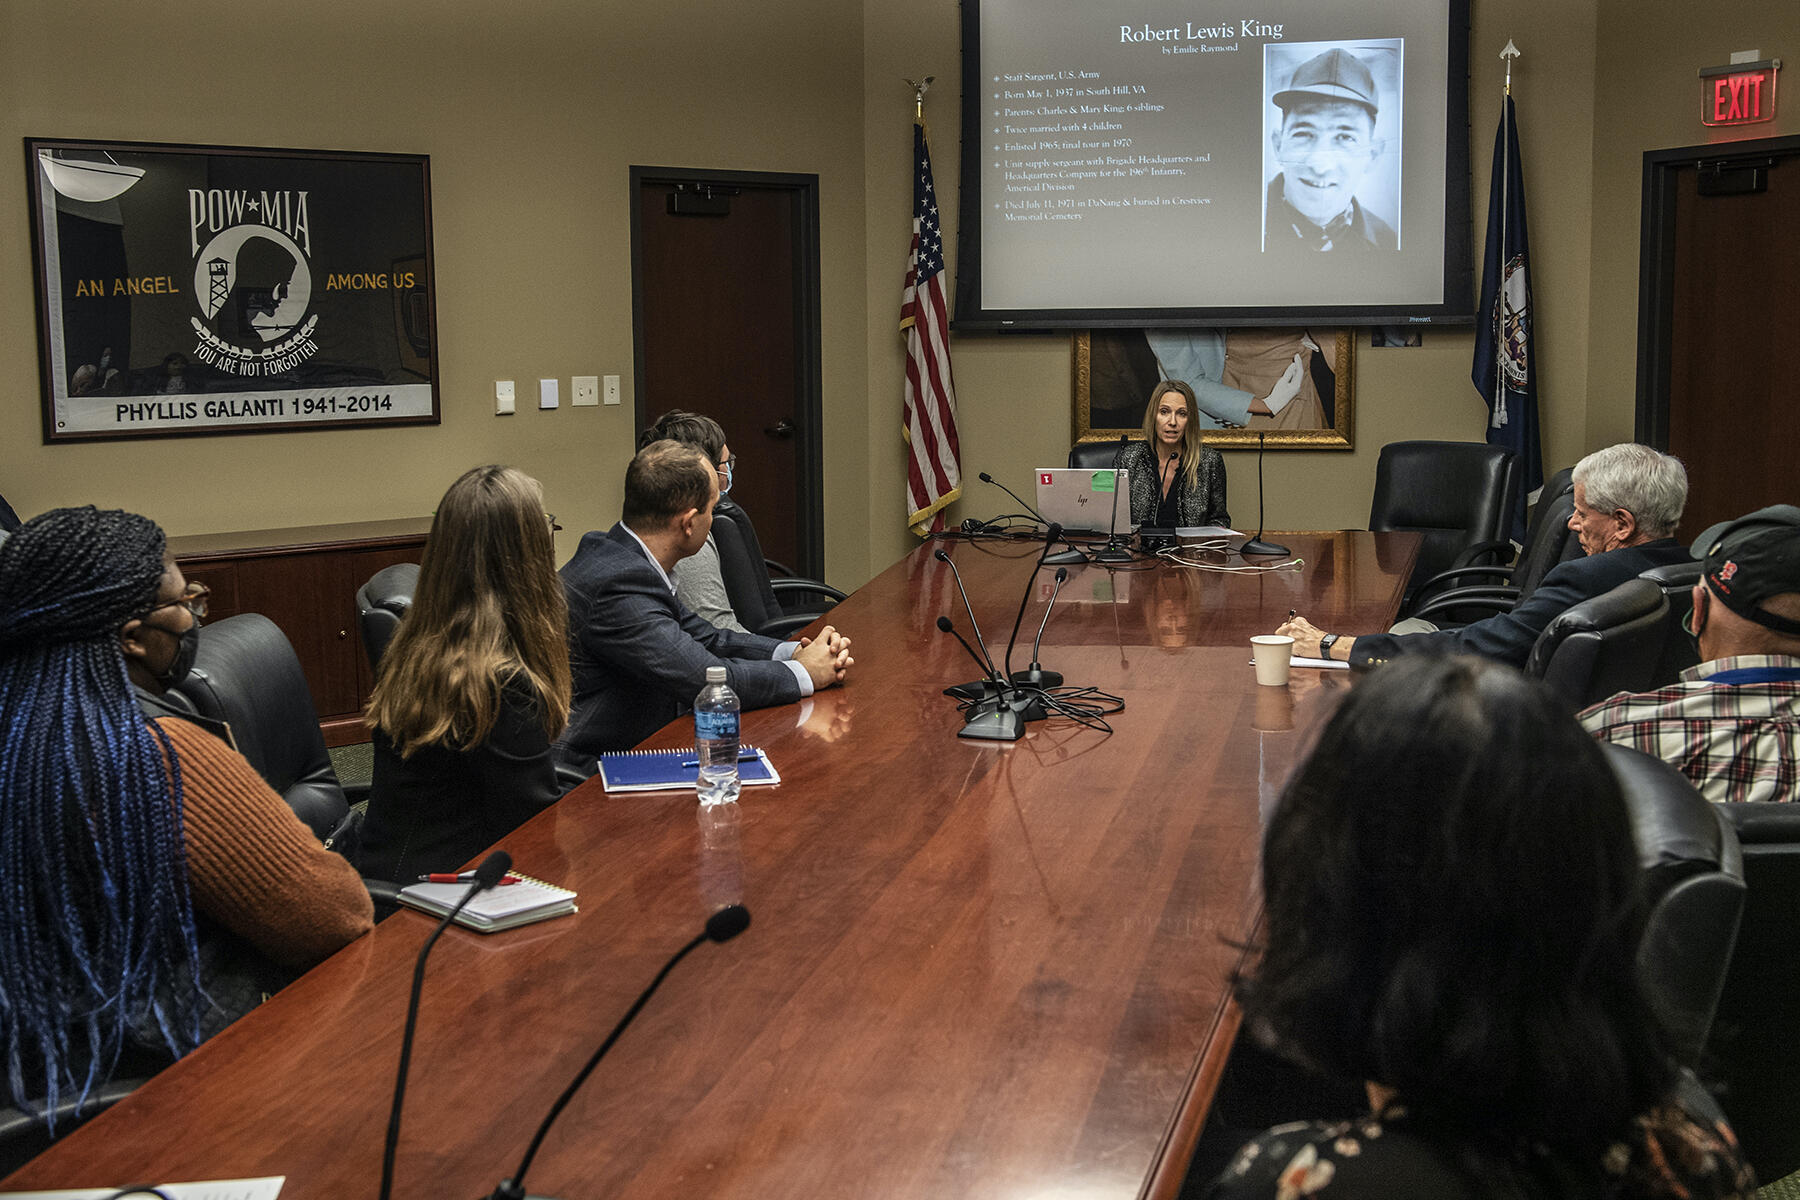 Emilie Raymond, Ph.D., a professor in the Department of History, presents her research on Robert Lewis King, a U.S. Army staff sergeant from South Hill, Virginia, who died in April 1971.